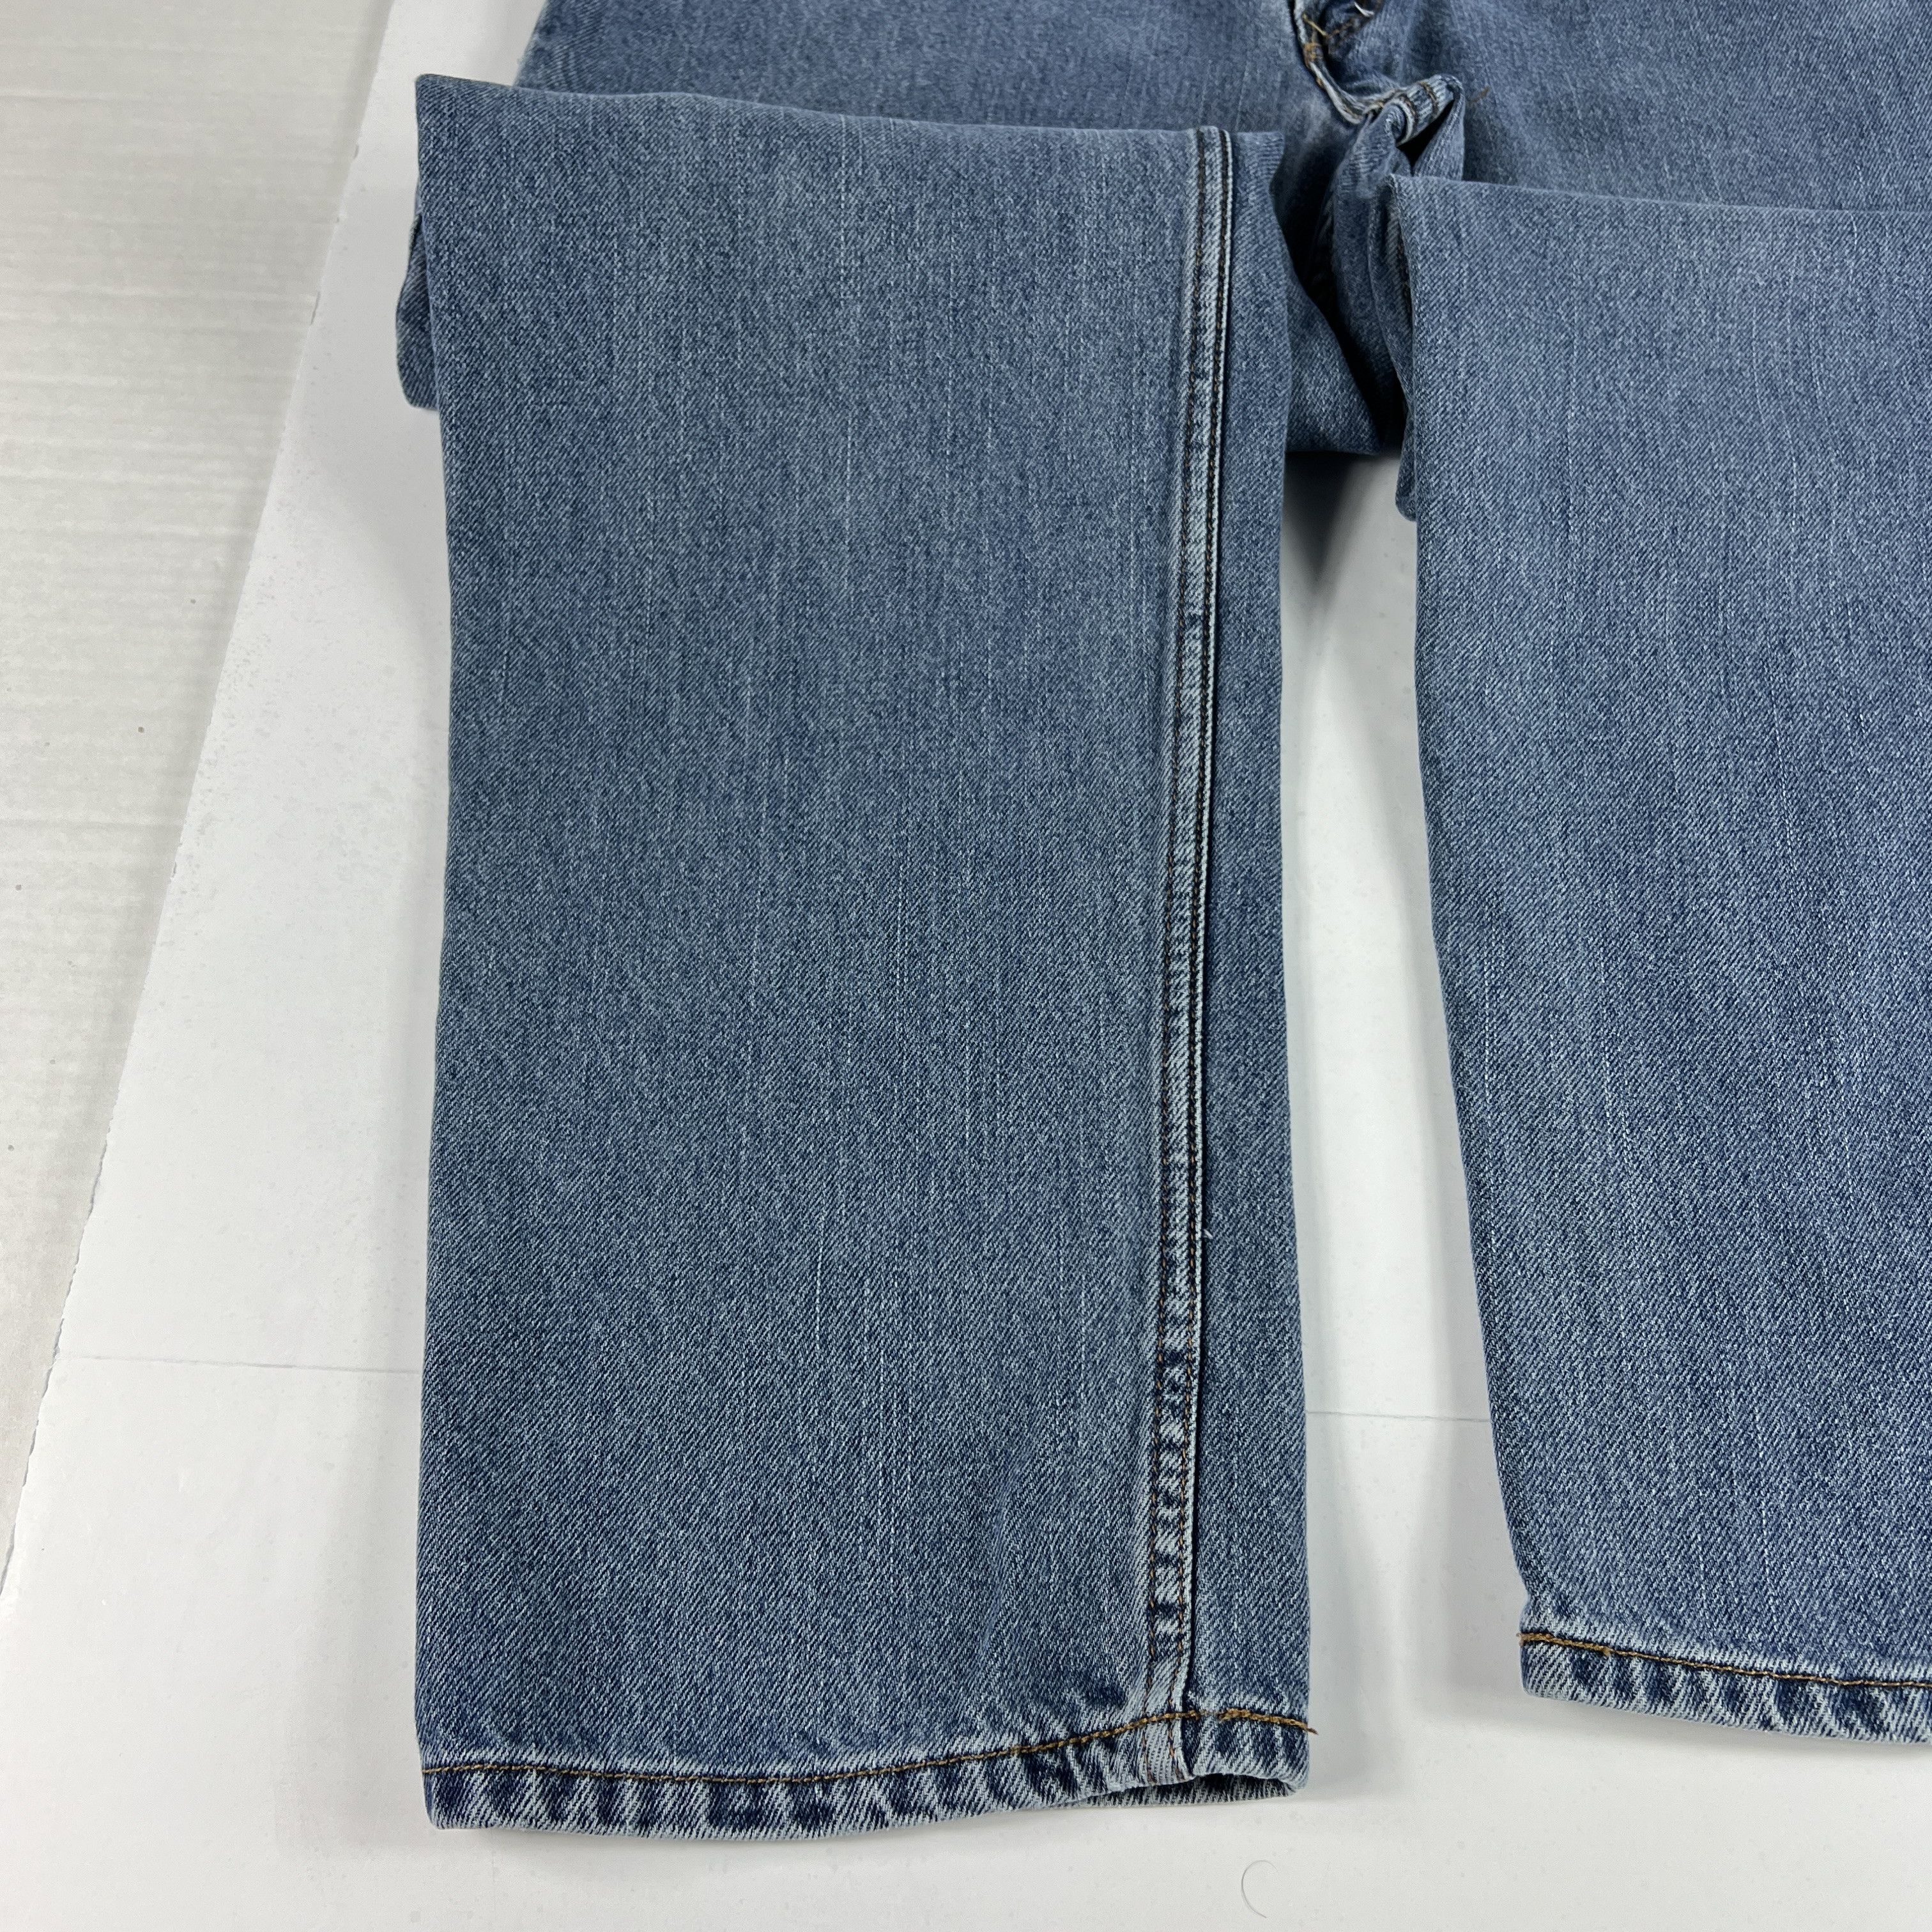 Levi's Y2K Levi's Jean 550 Relaxed Straight Blue Faded Cotton Denim Size US 34 / EU 50 - 6 Thumbnail